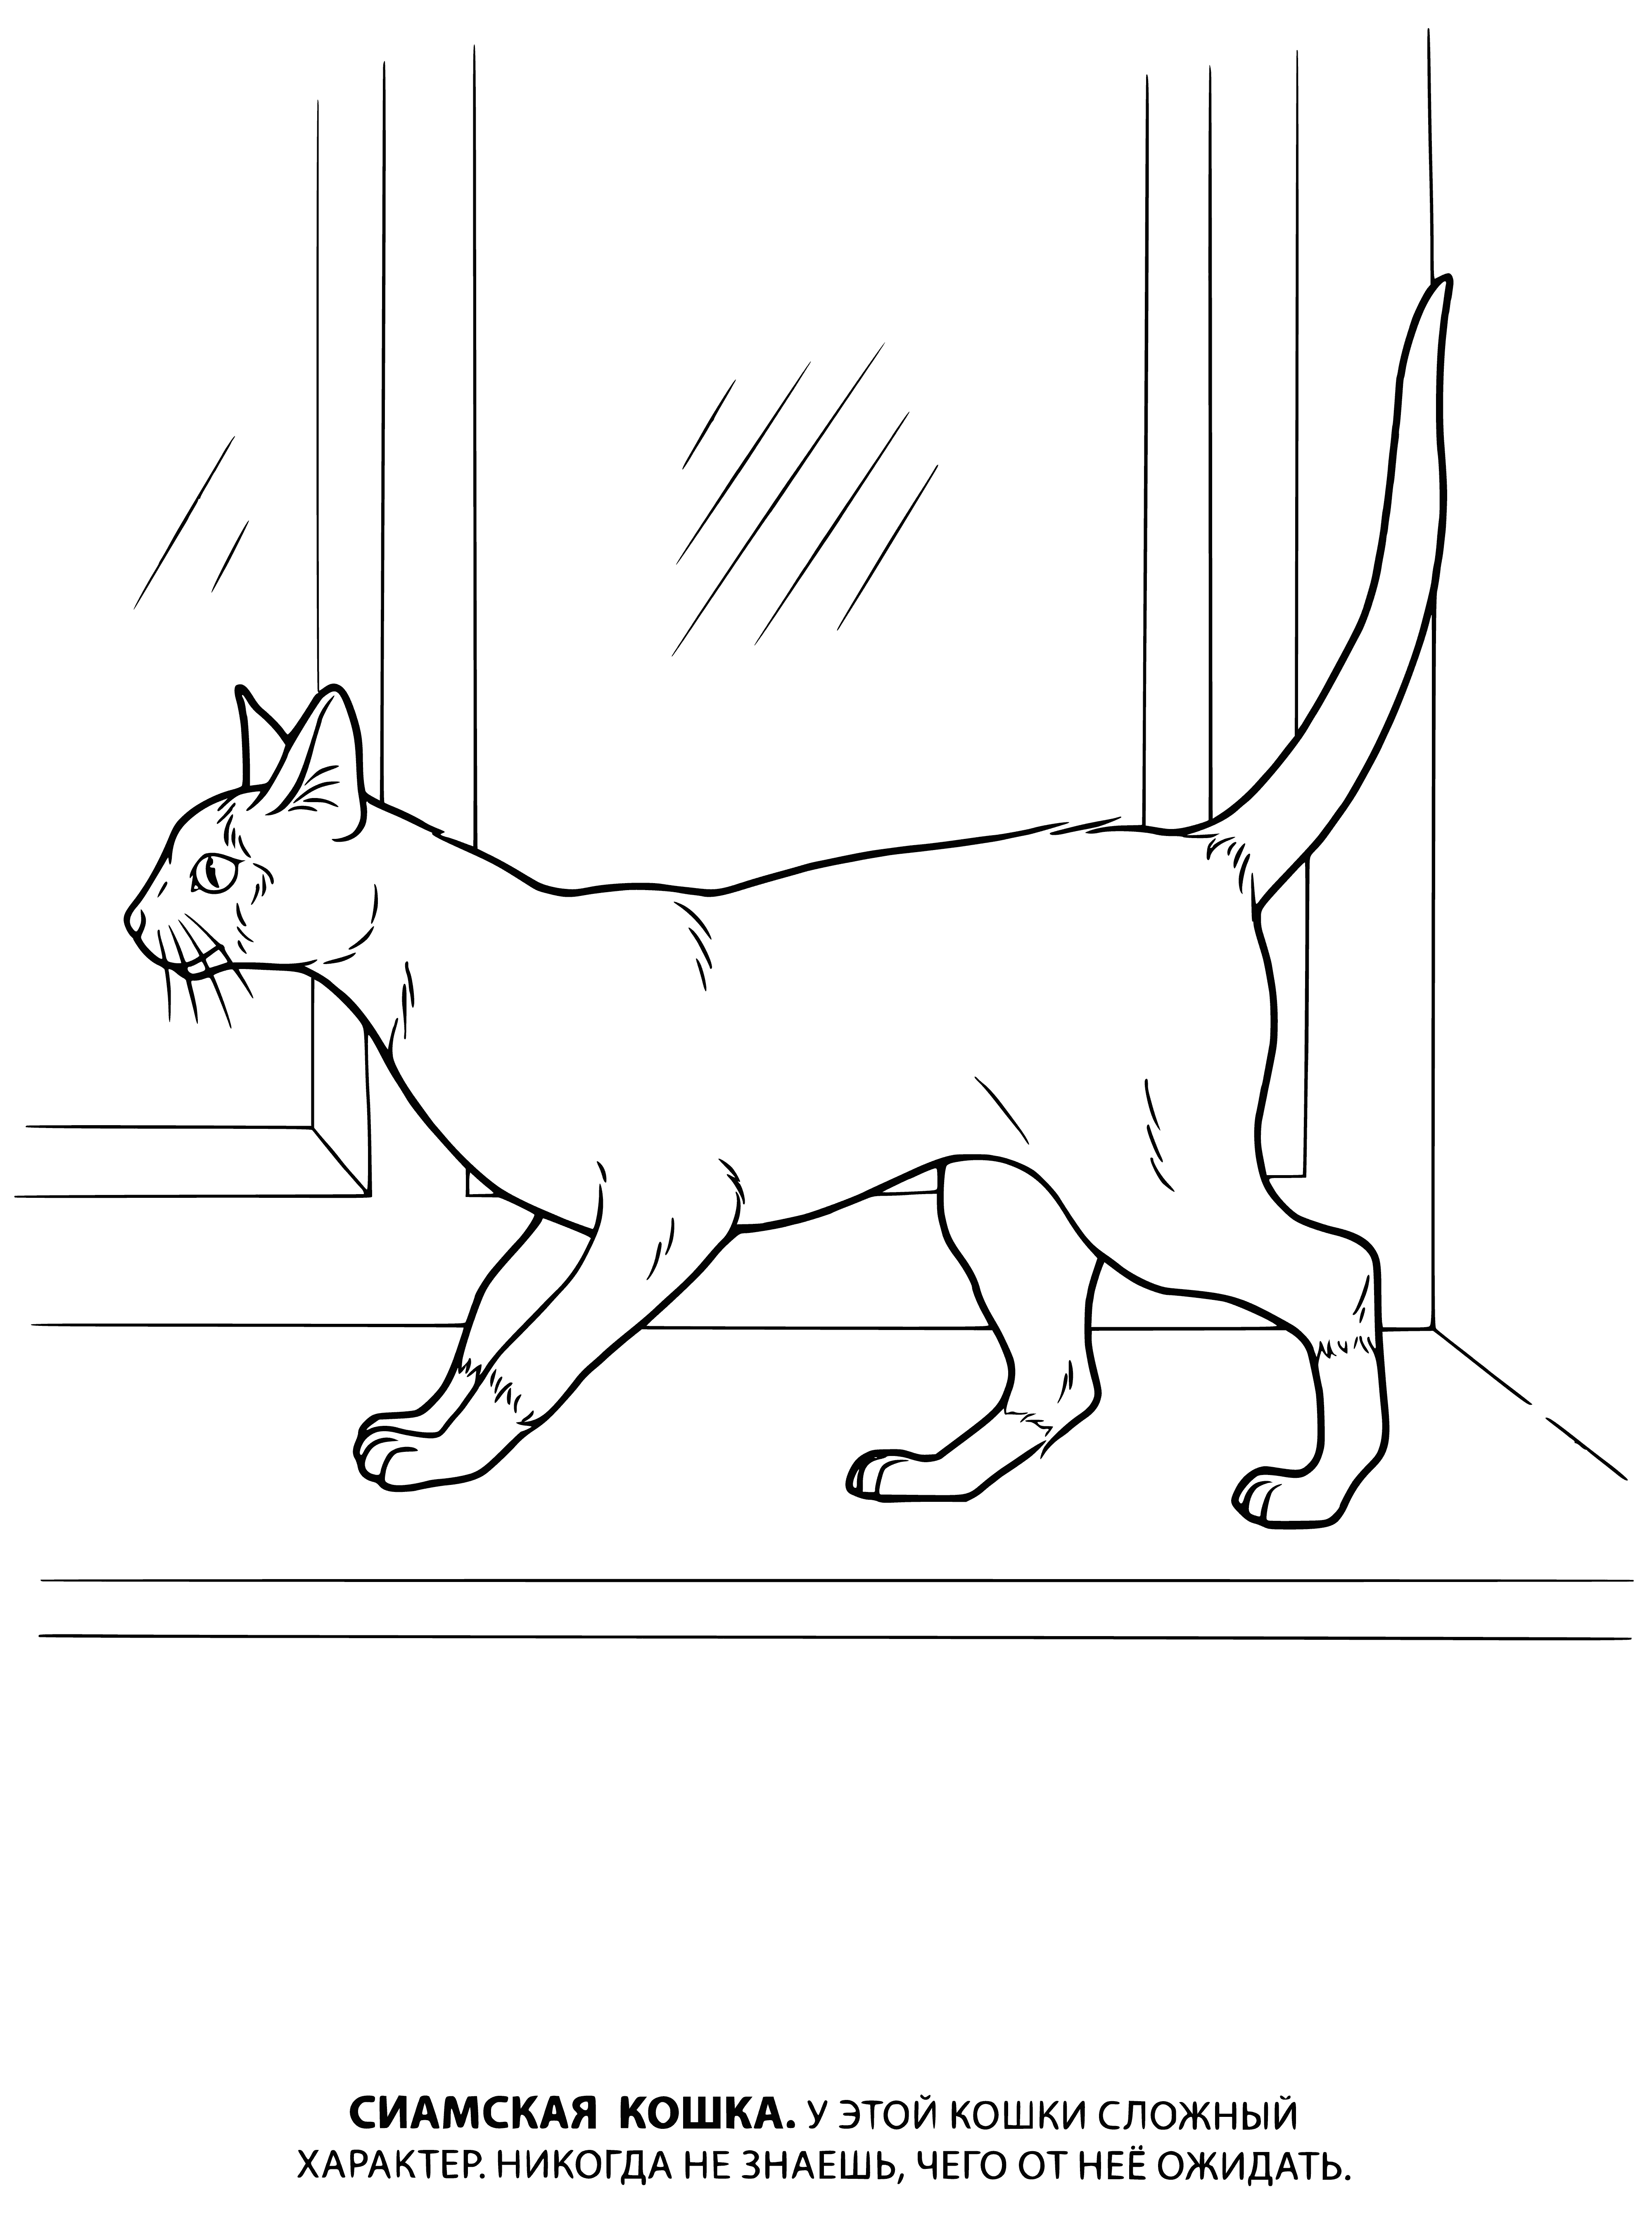 coloring page: Siamese cat with pointy ears, blue eyes on a brown table with beige cloth, behind the cat is a brown chair.